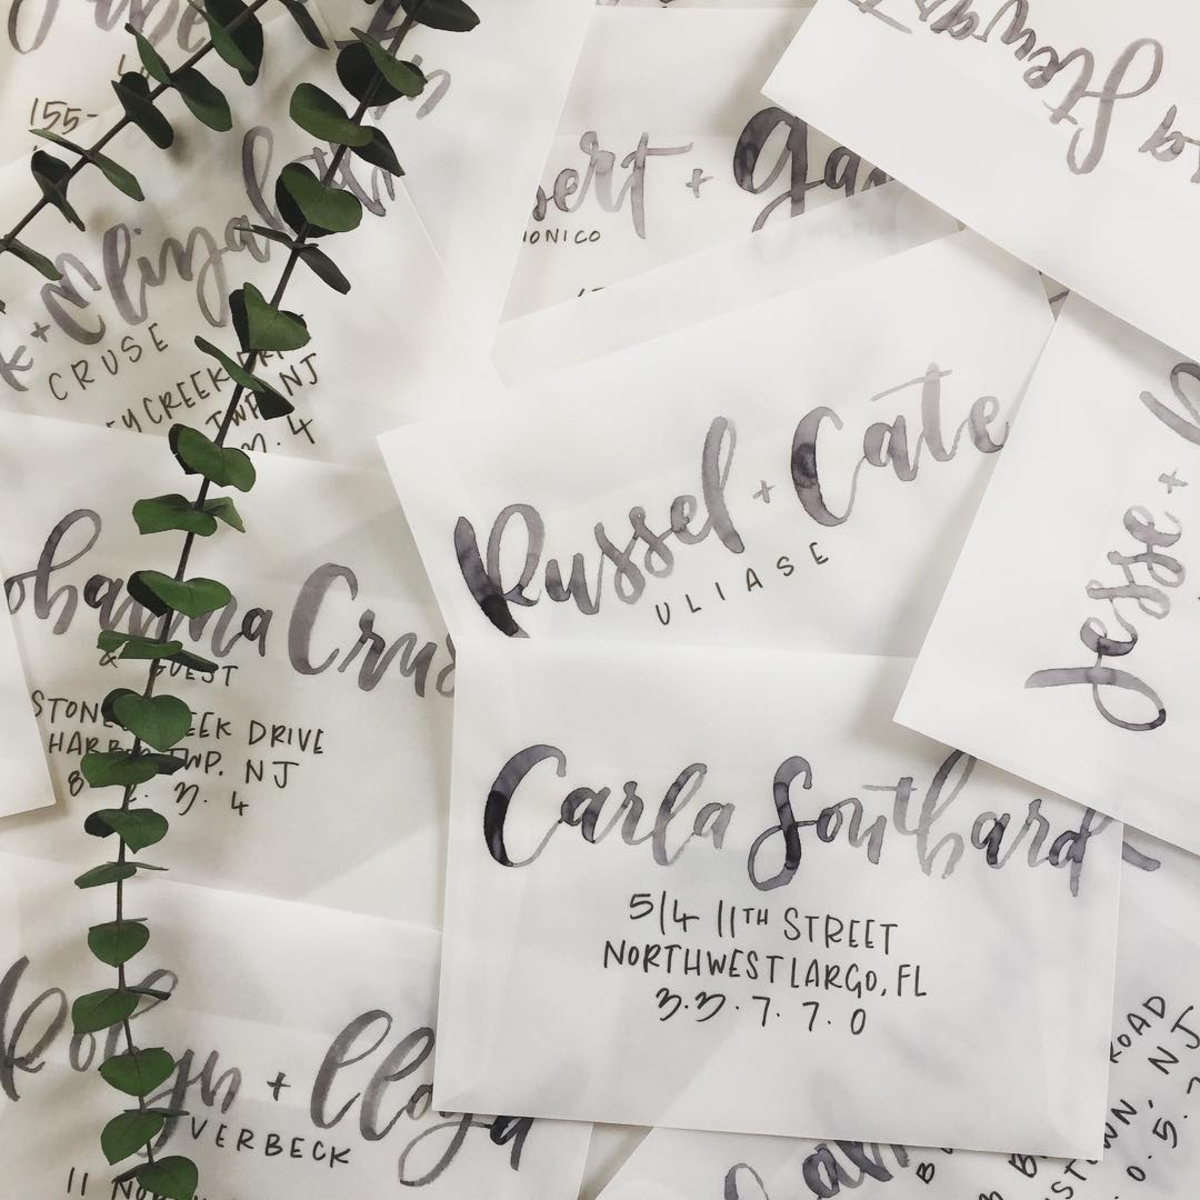 Vellum Envelopes with Brush Lettering by Willow Wynn Co.